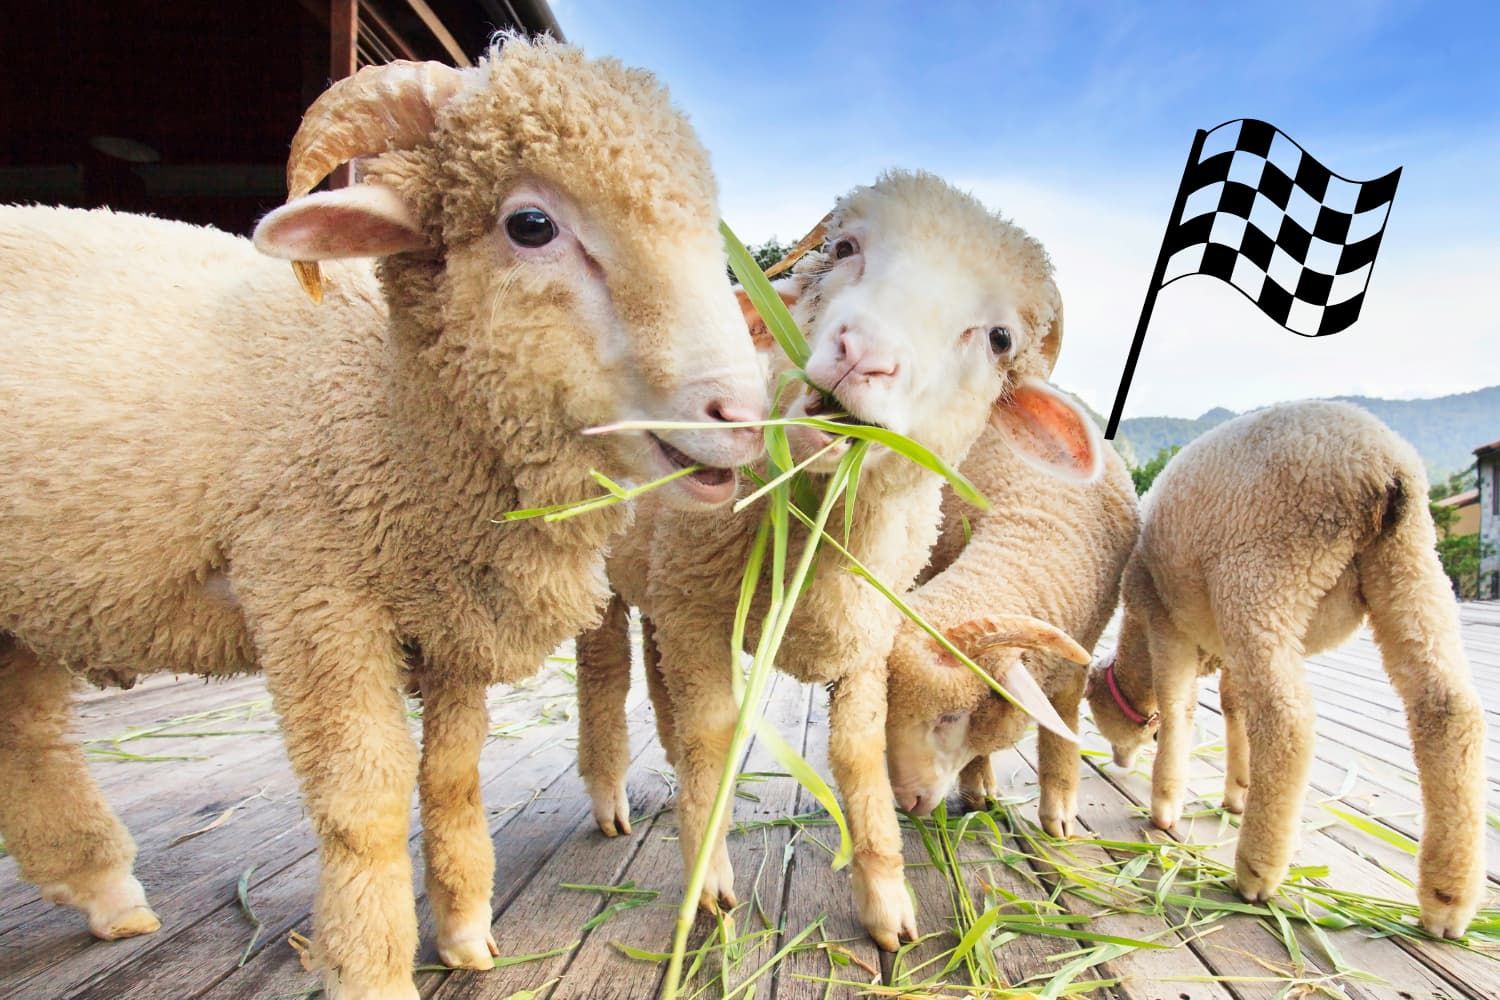 Game%20-%20OT%20Psalm%2023%20-%20The%20feed%20the%20sheep%20relay%20race-6bb58723 Shelter